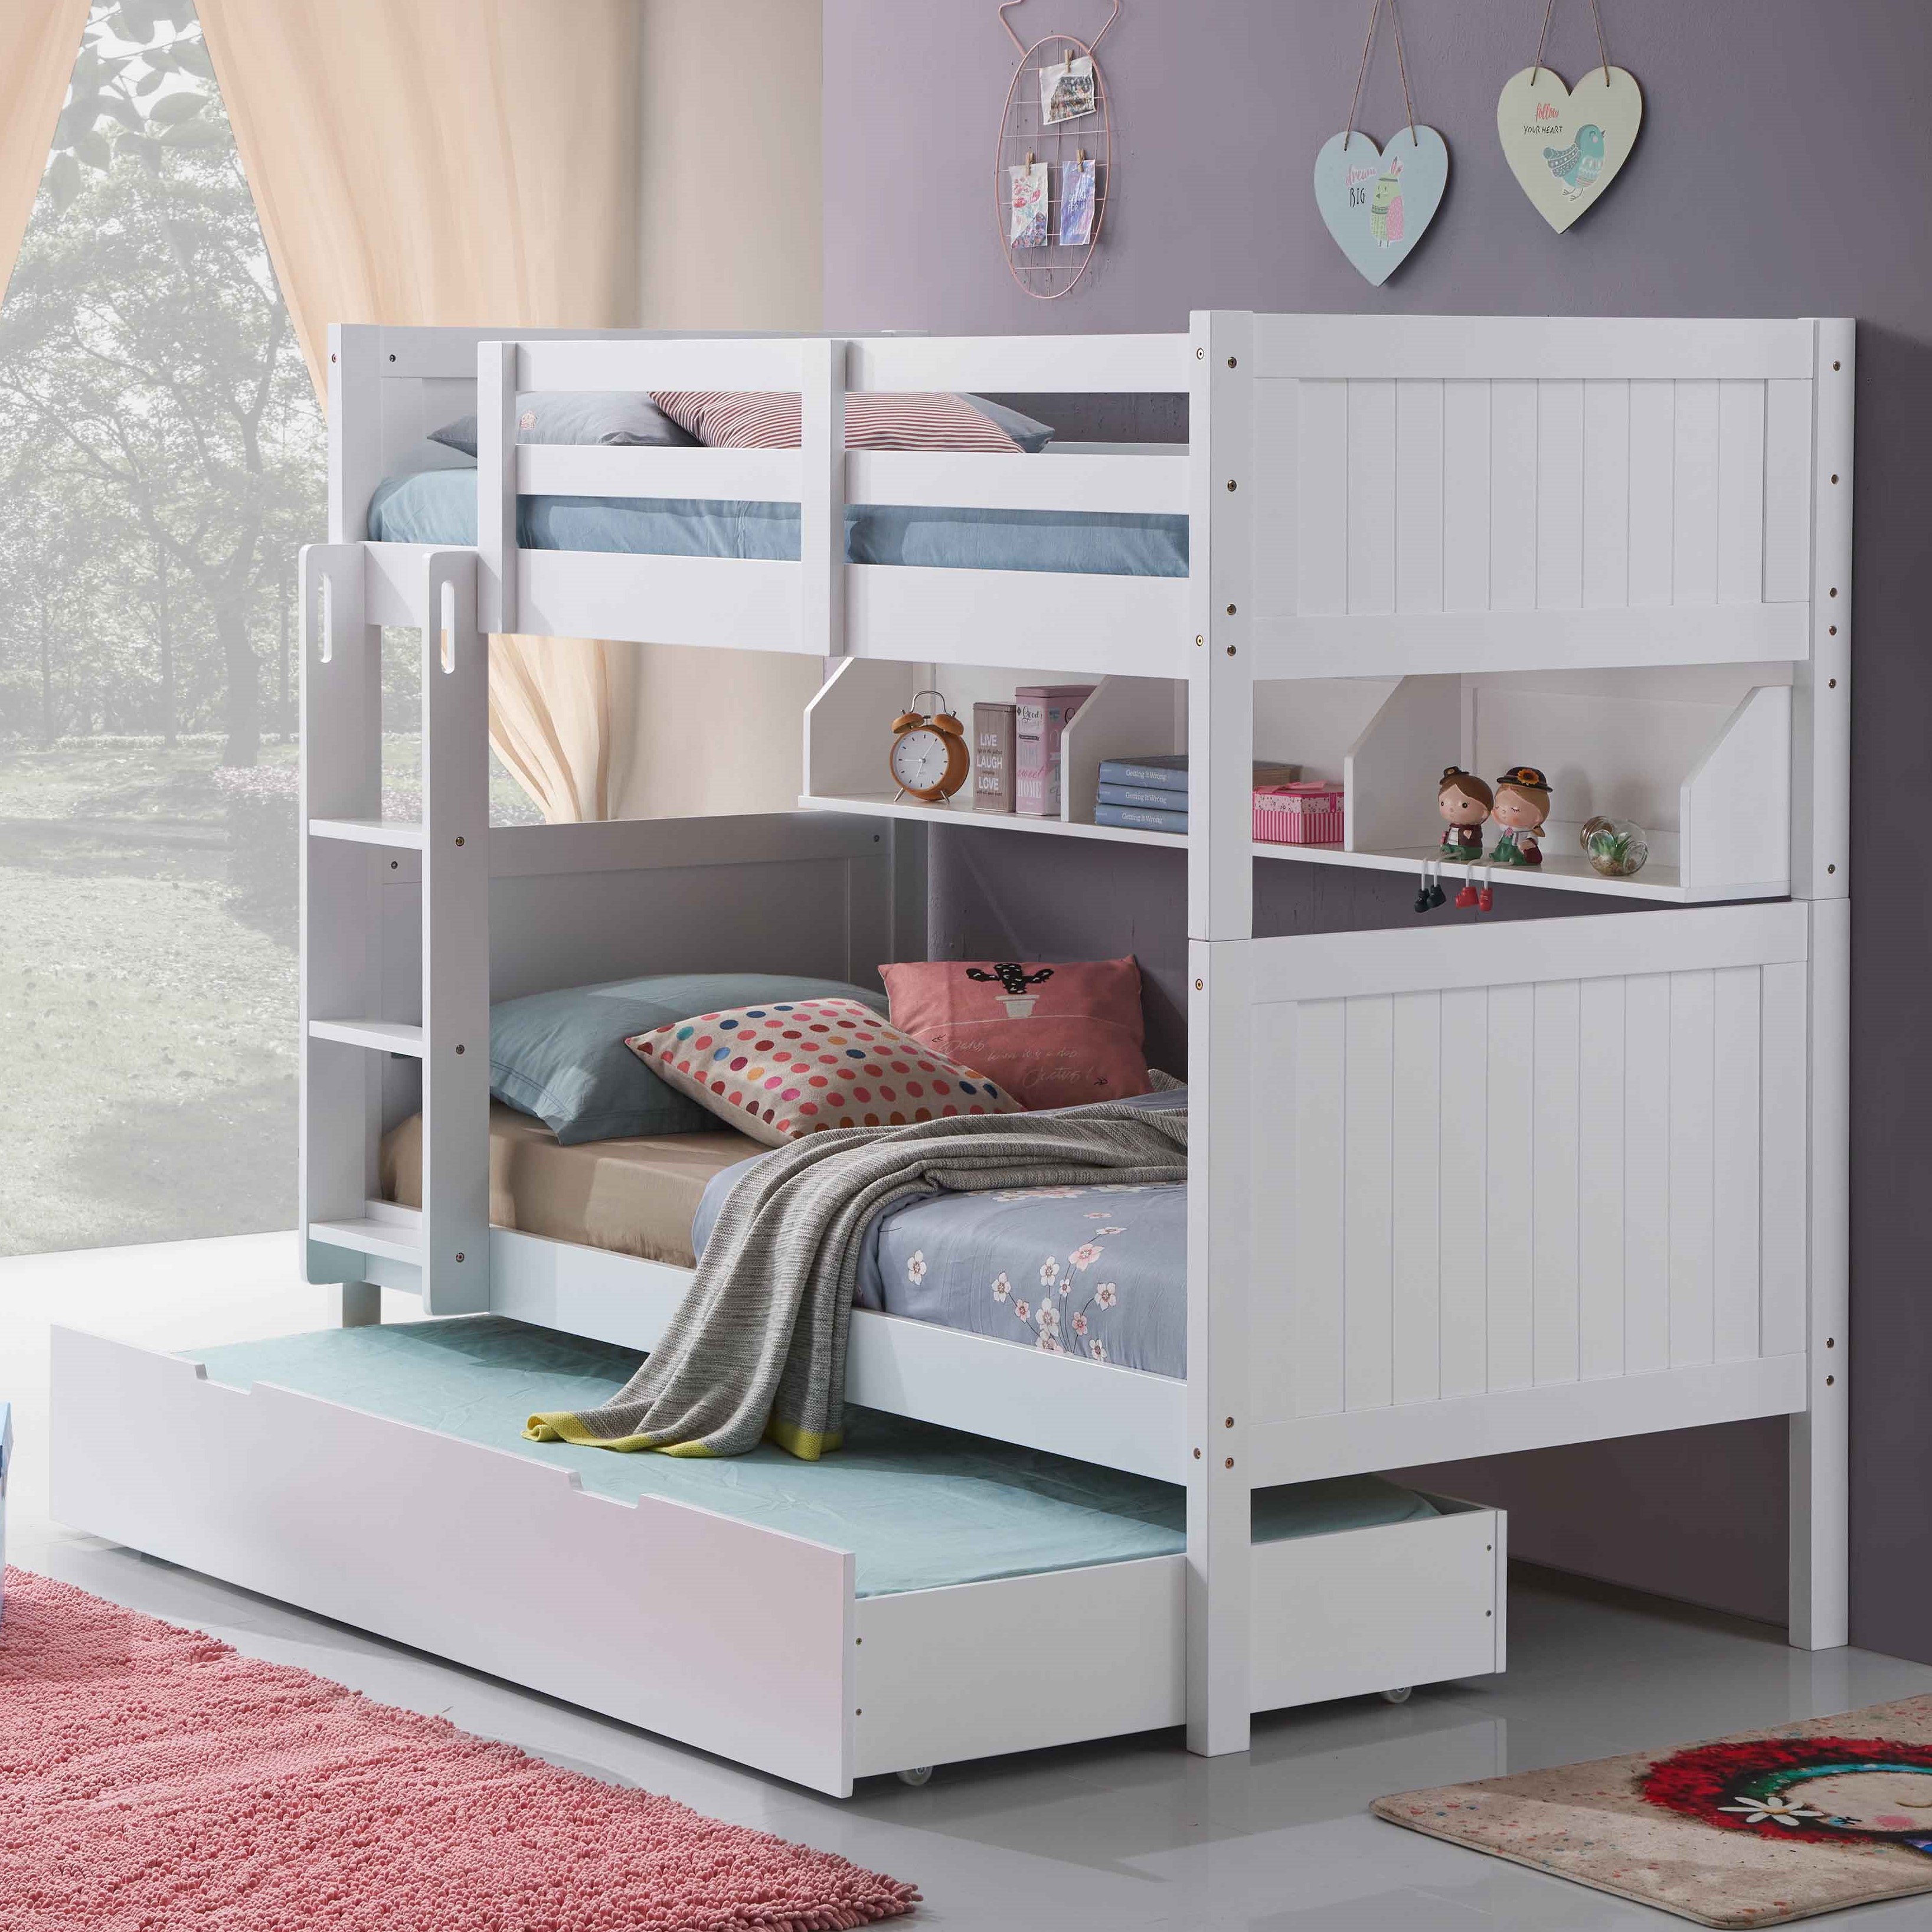 Bailey My Shelf Bunk Single Bed, Single Bunk Bed With Storage